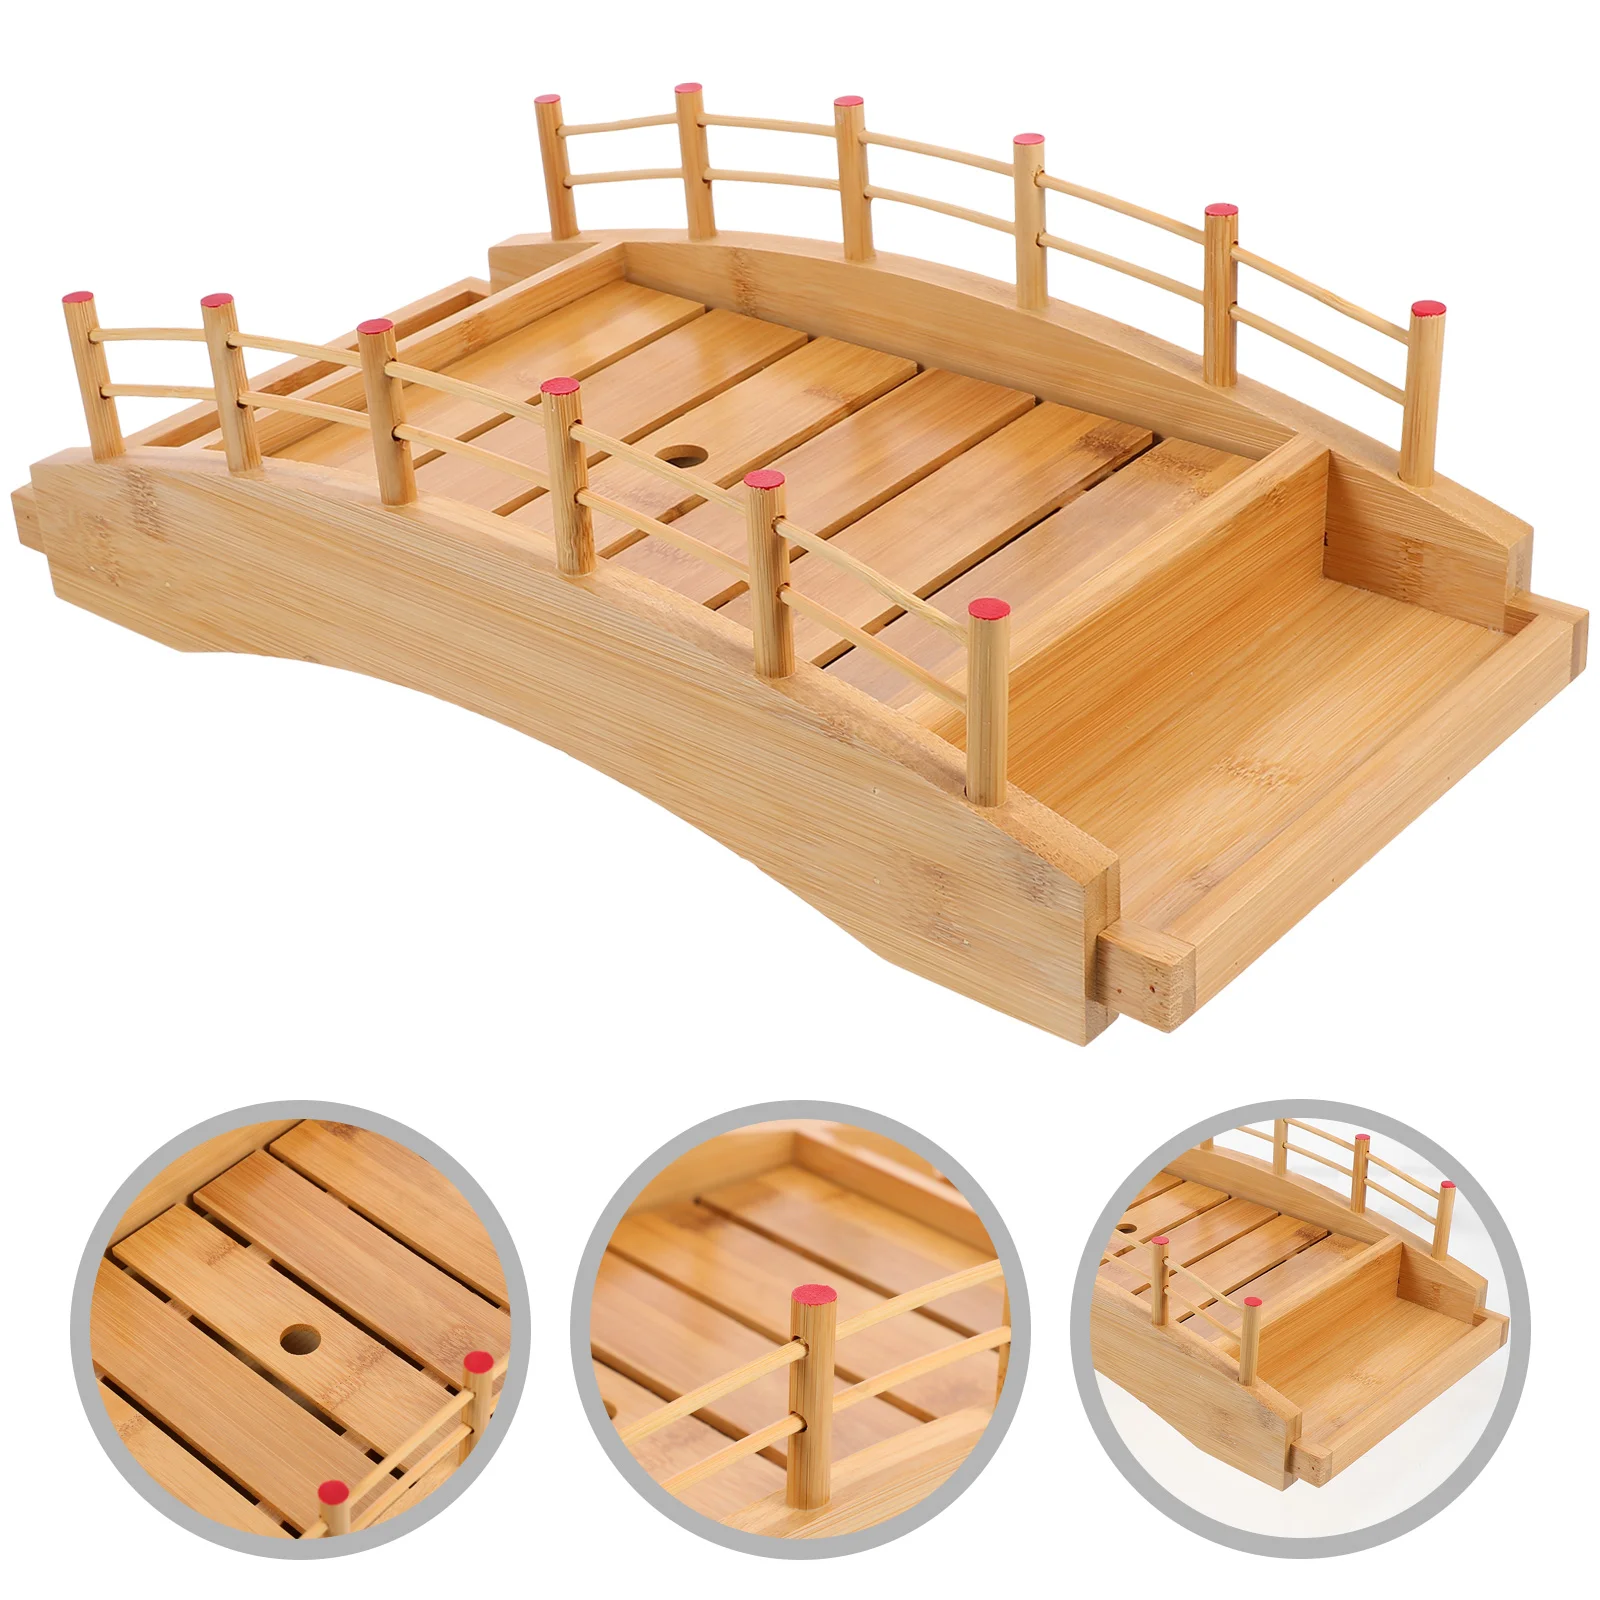 

Sushi Plate Boat Serving Tray Sashimi Bridge Wooden Platter Japanese Board Wood Dish Bamboo Arch Plates Snack Appetizer Arched